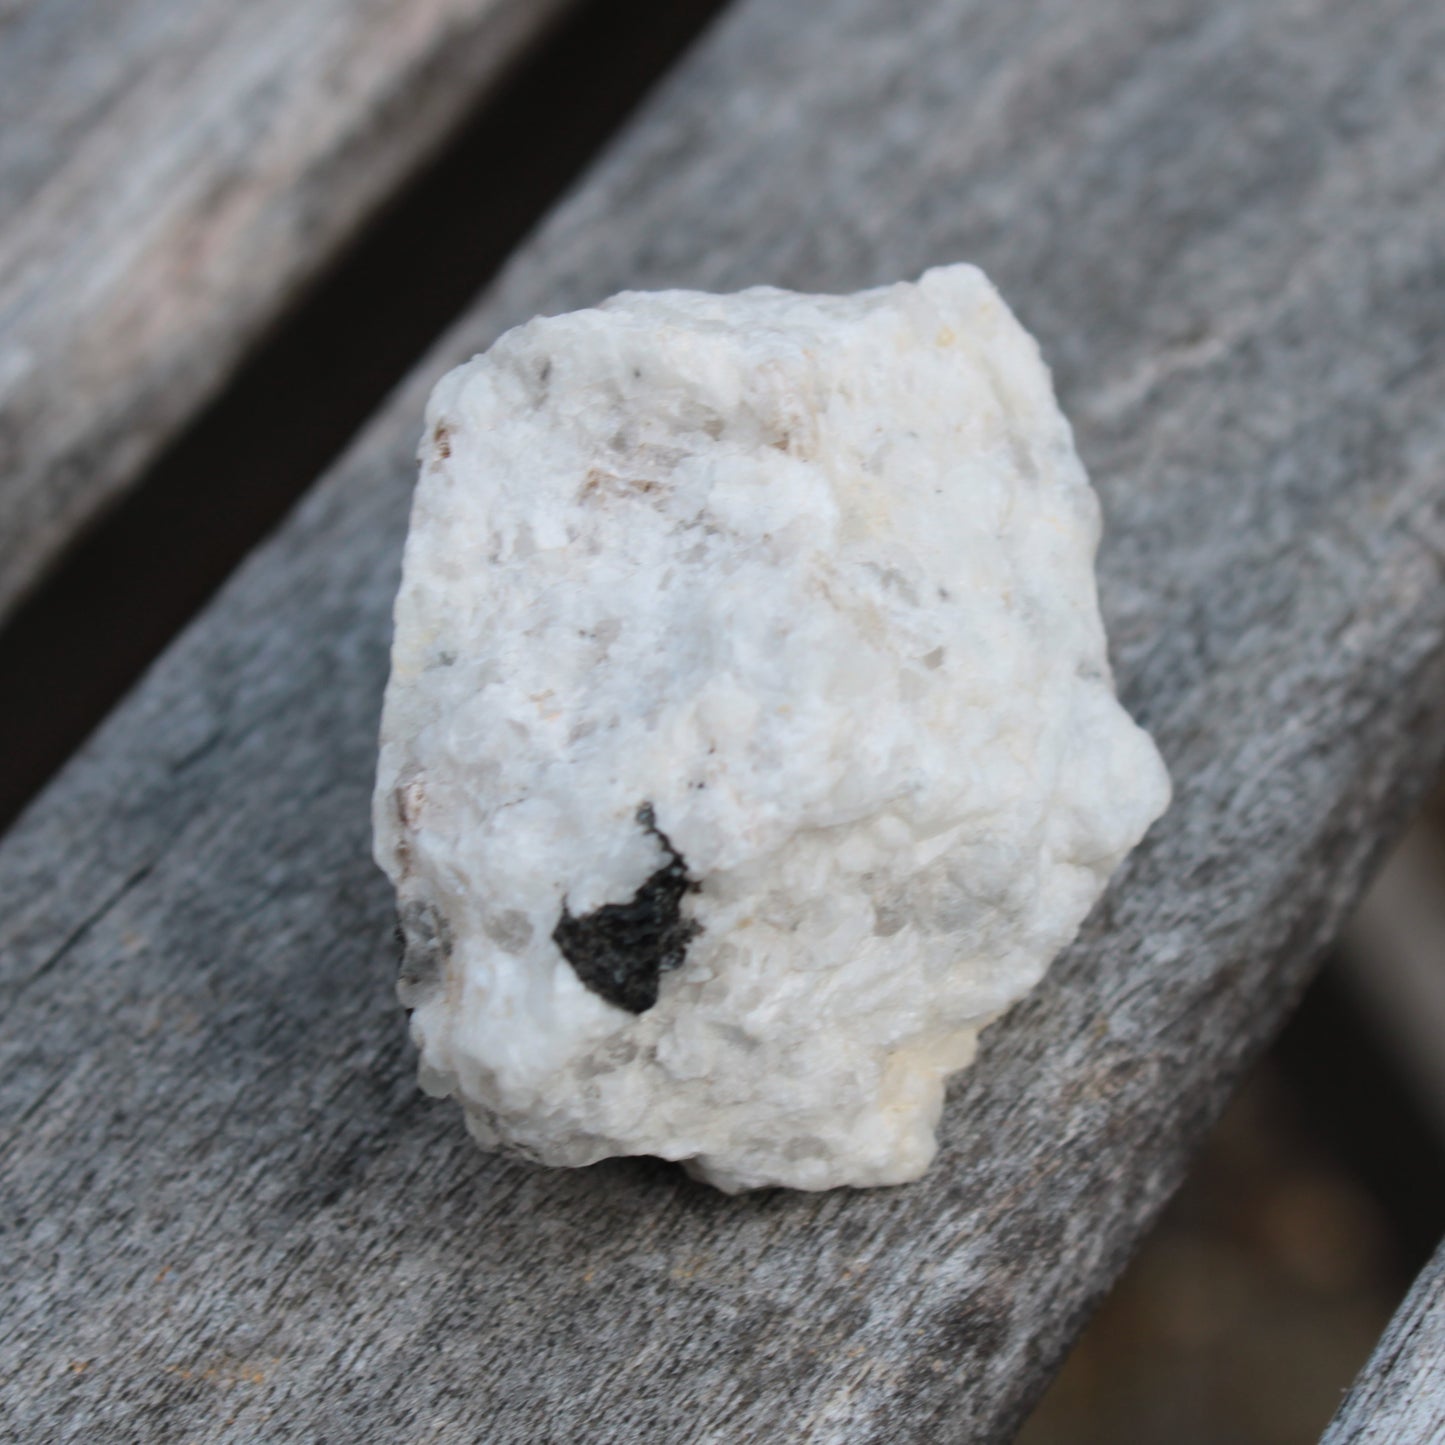 Mineralised Marble/Dolomite matrix from Afghanistan 170.5ct 34.1g